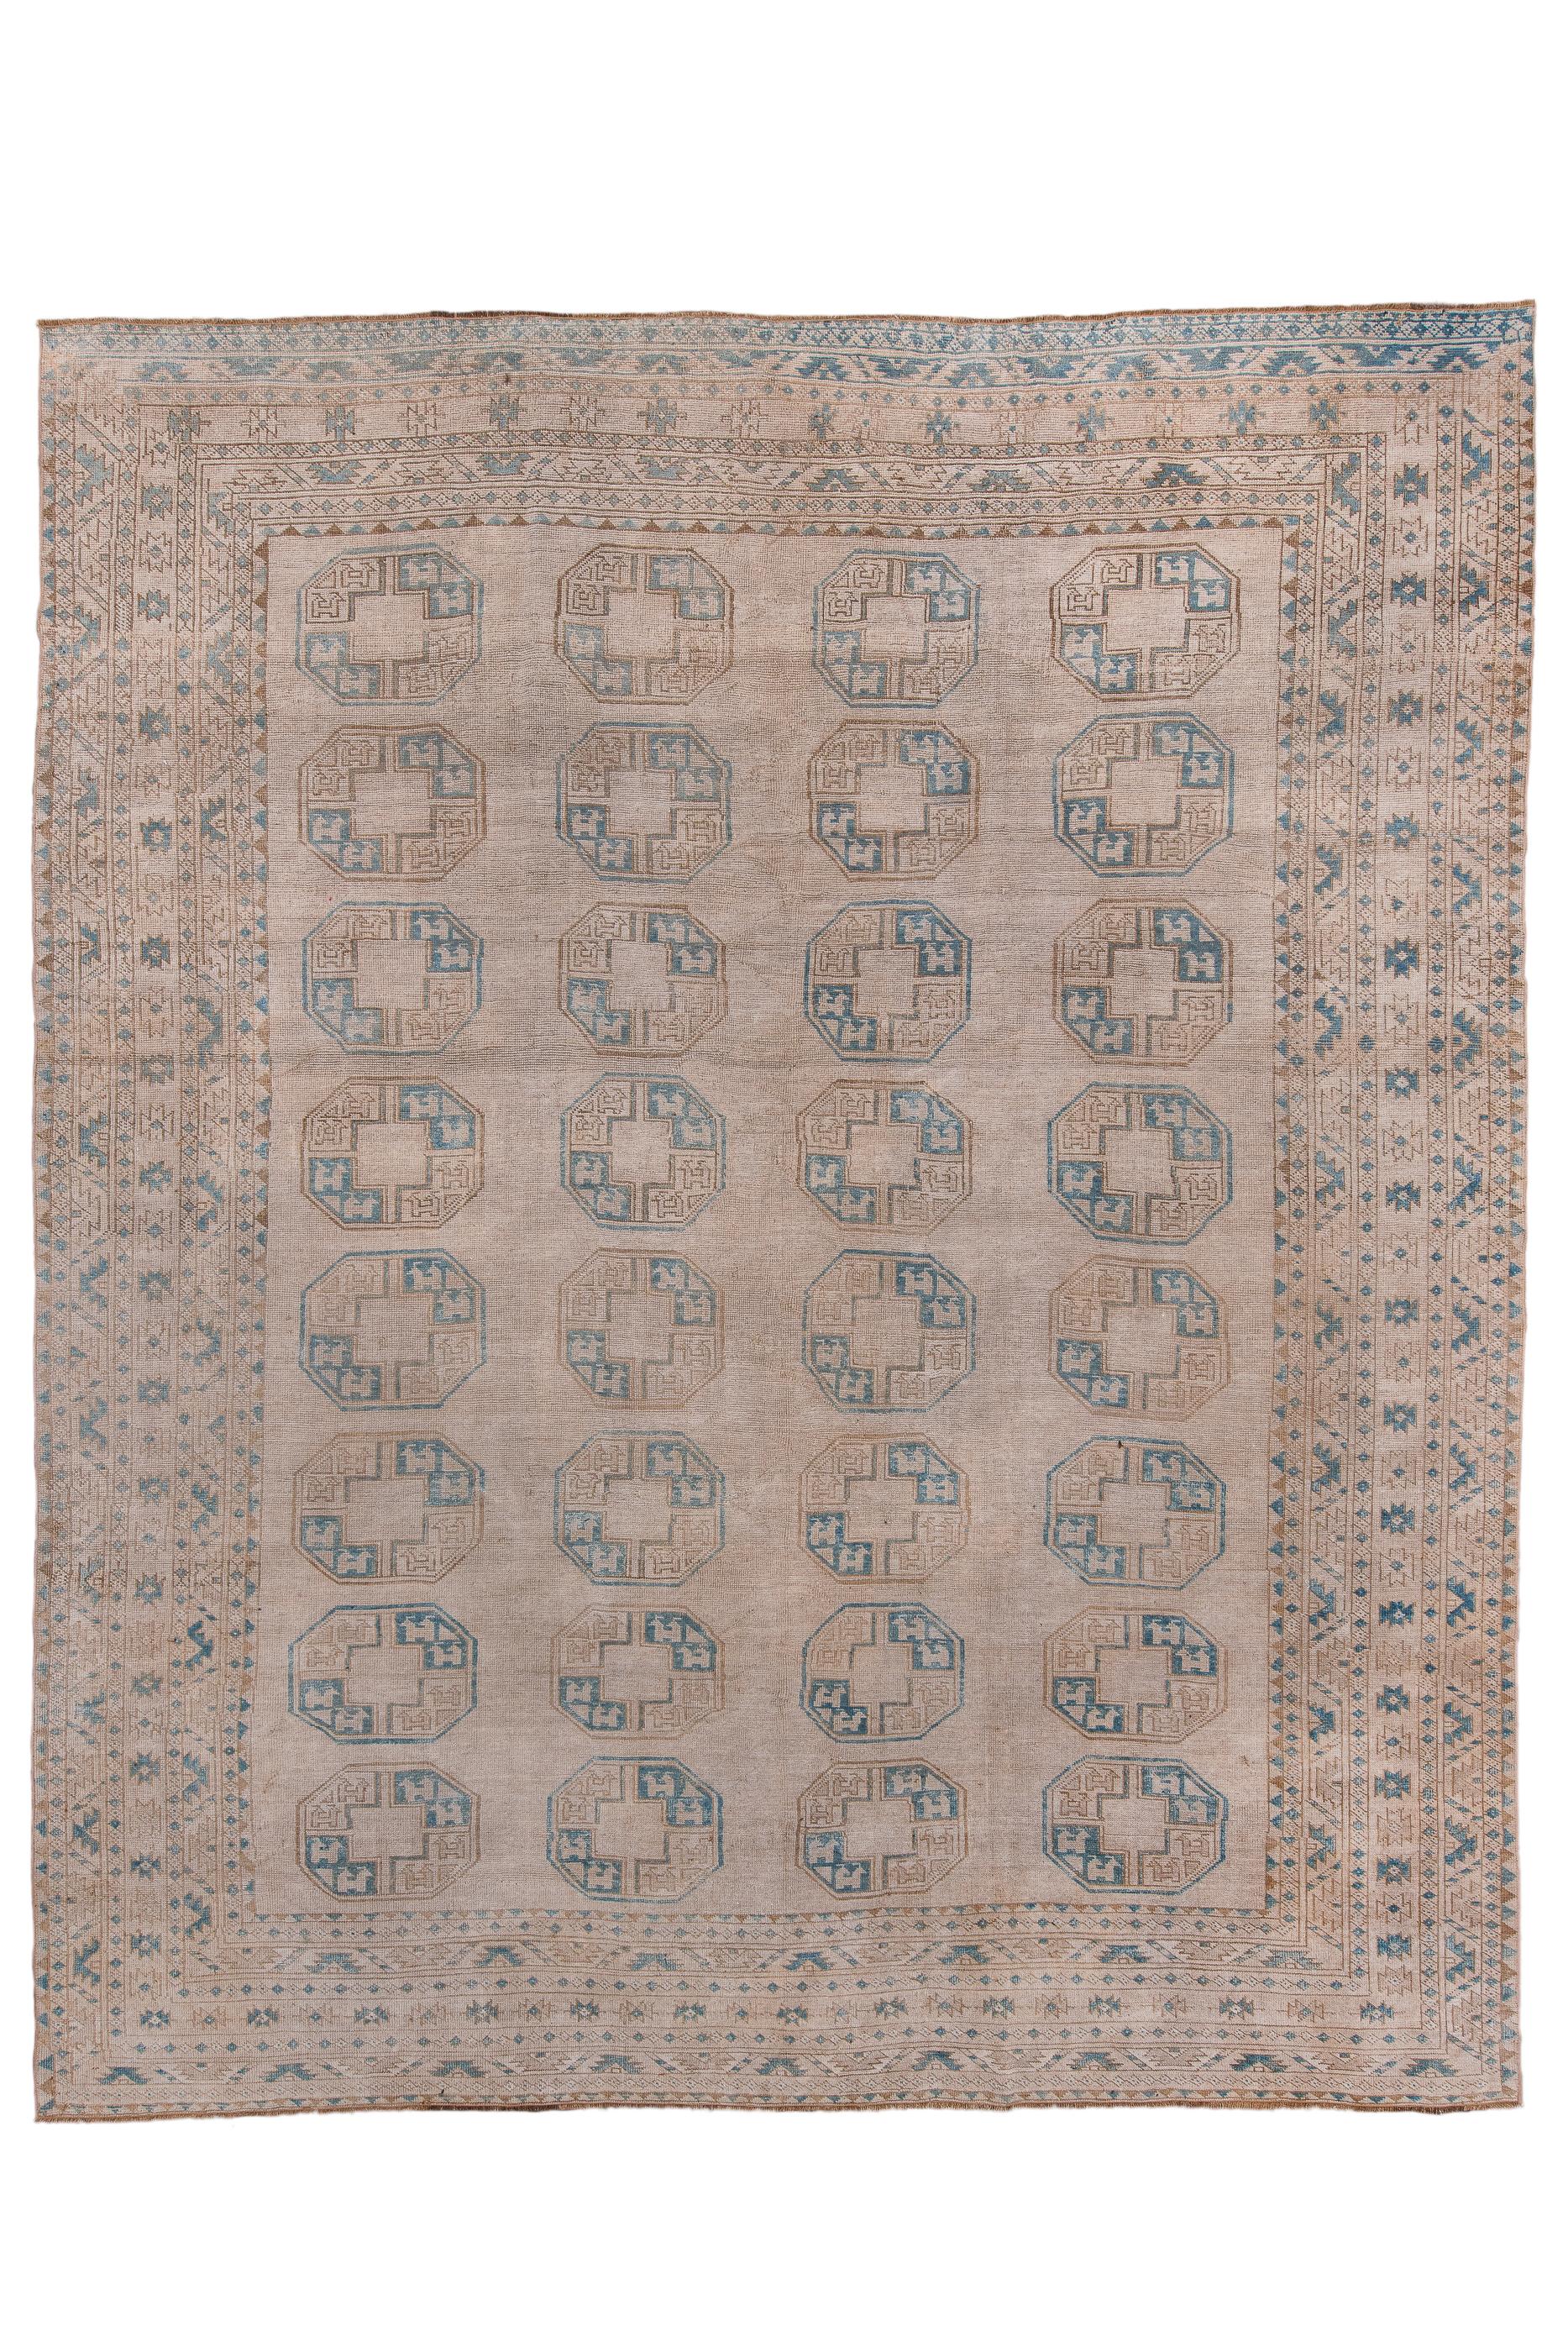 This nearly square nomadic piece from northern Afghanistan show a light tan field with four columns, each of  eight octagonal tauk noska (chicken) guls, all well-spaced, within a border system  including two stripes with half-ashiks and a central 